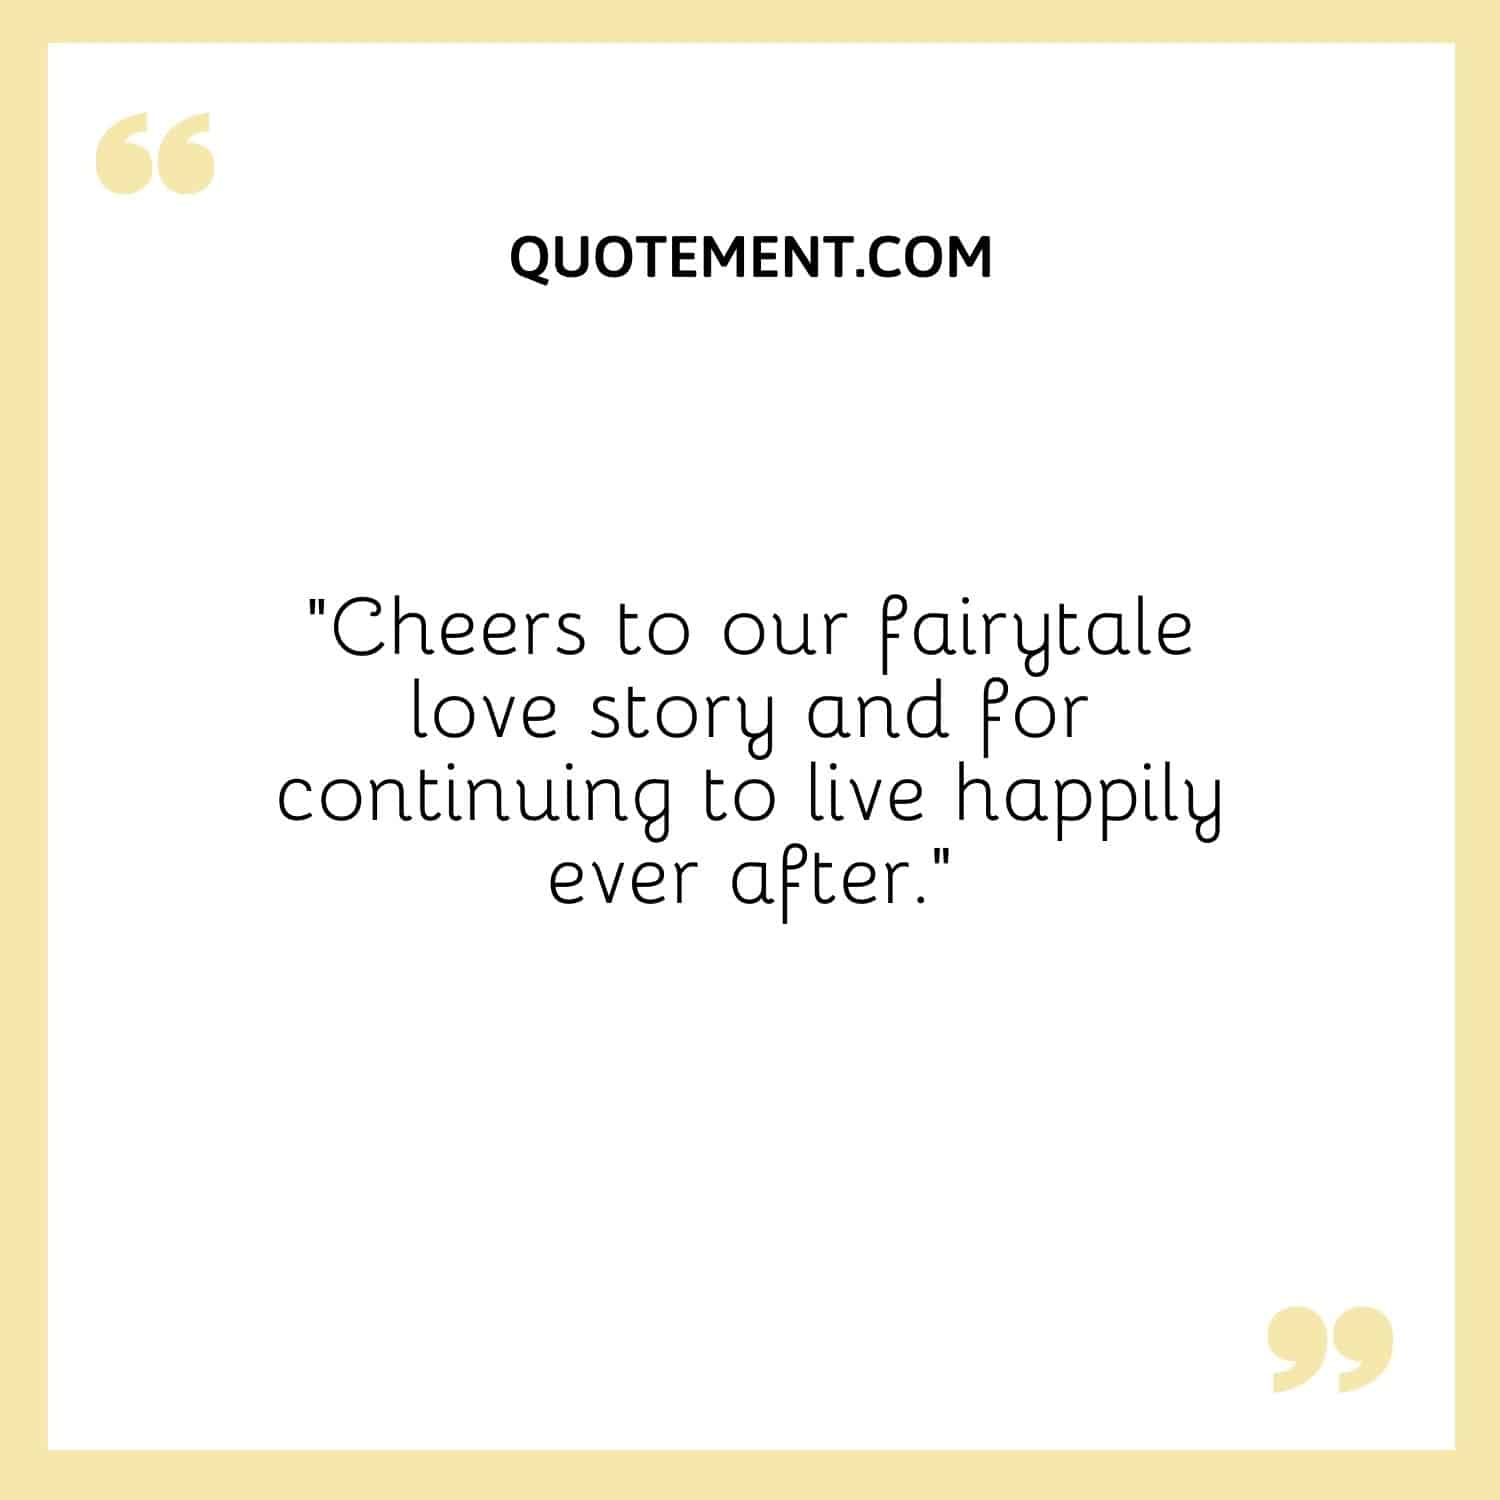 “Cheers to our fairytale love story and for continuing to live happily ever after.”